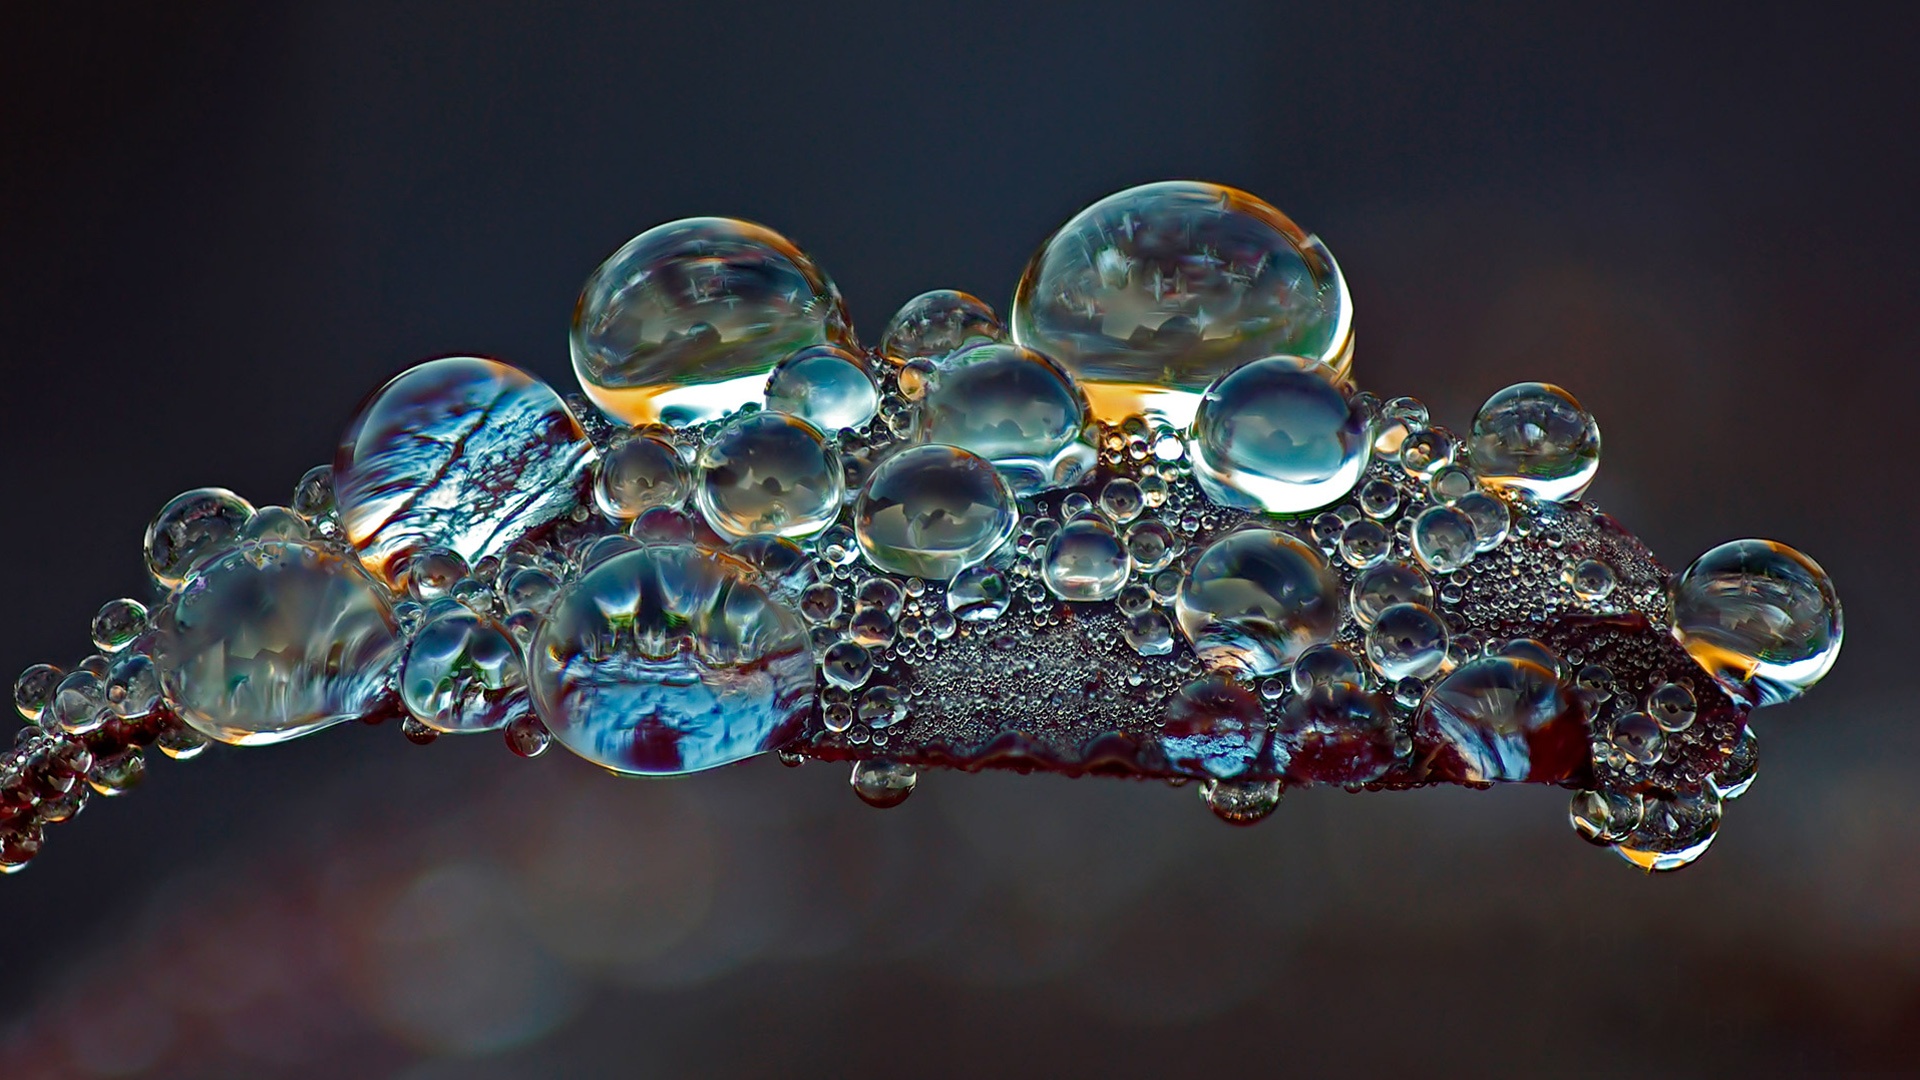 670+ Water Drop HD Wallpapers and Backgrounds